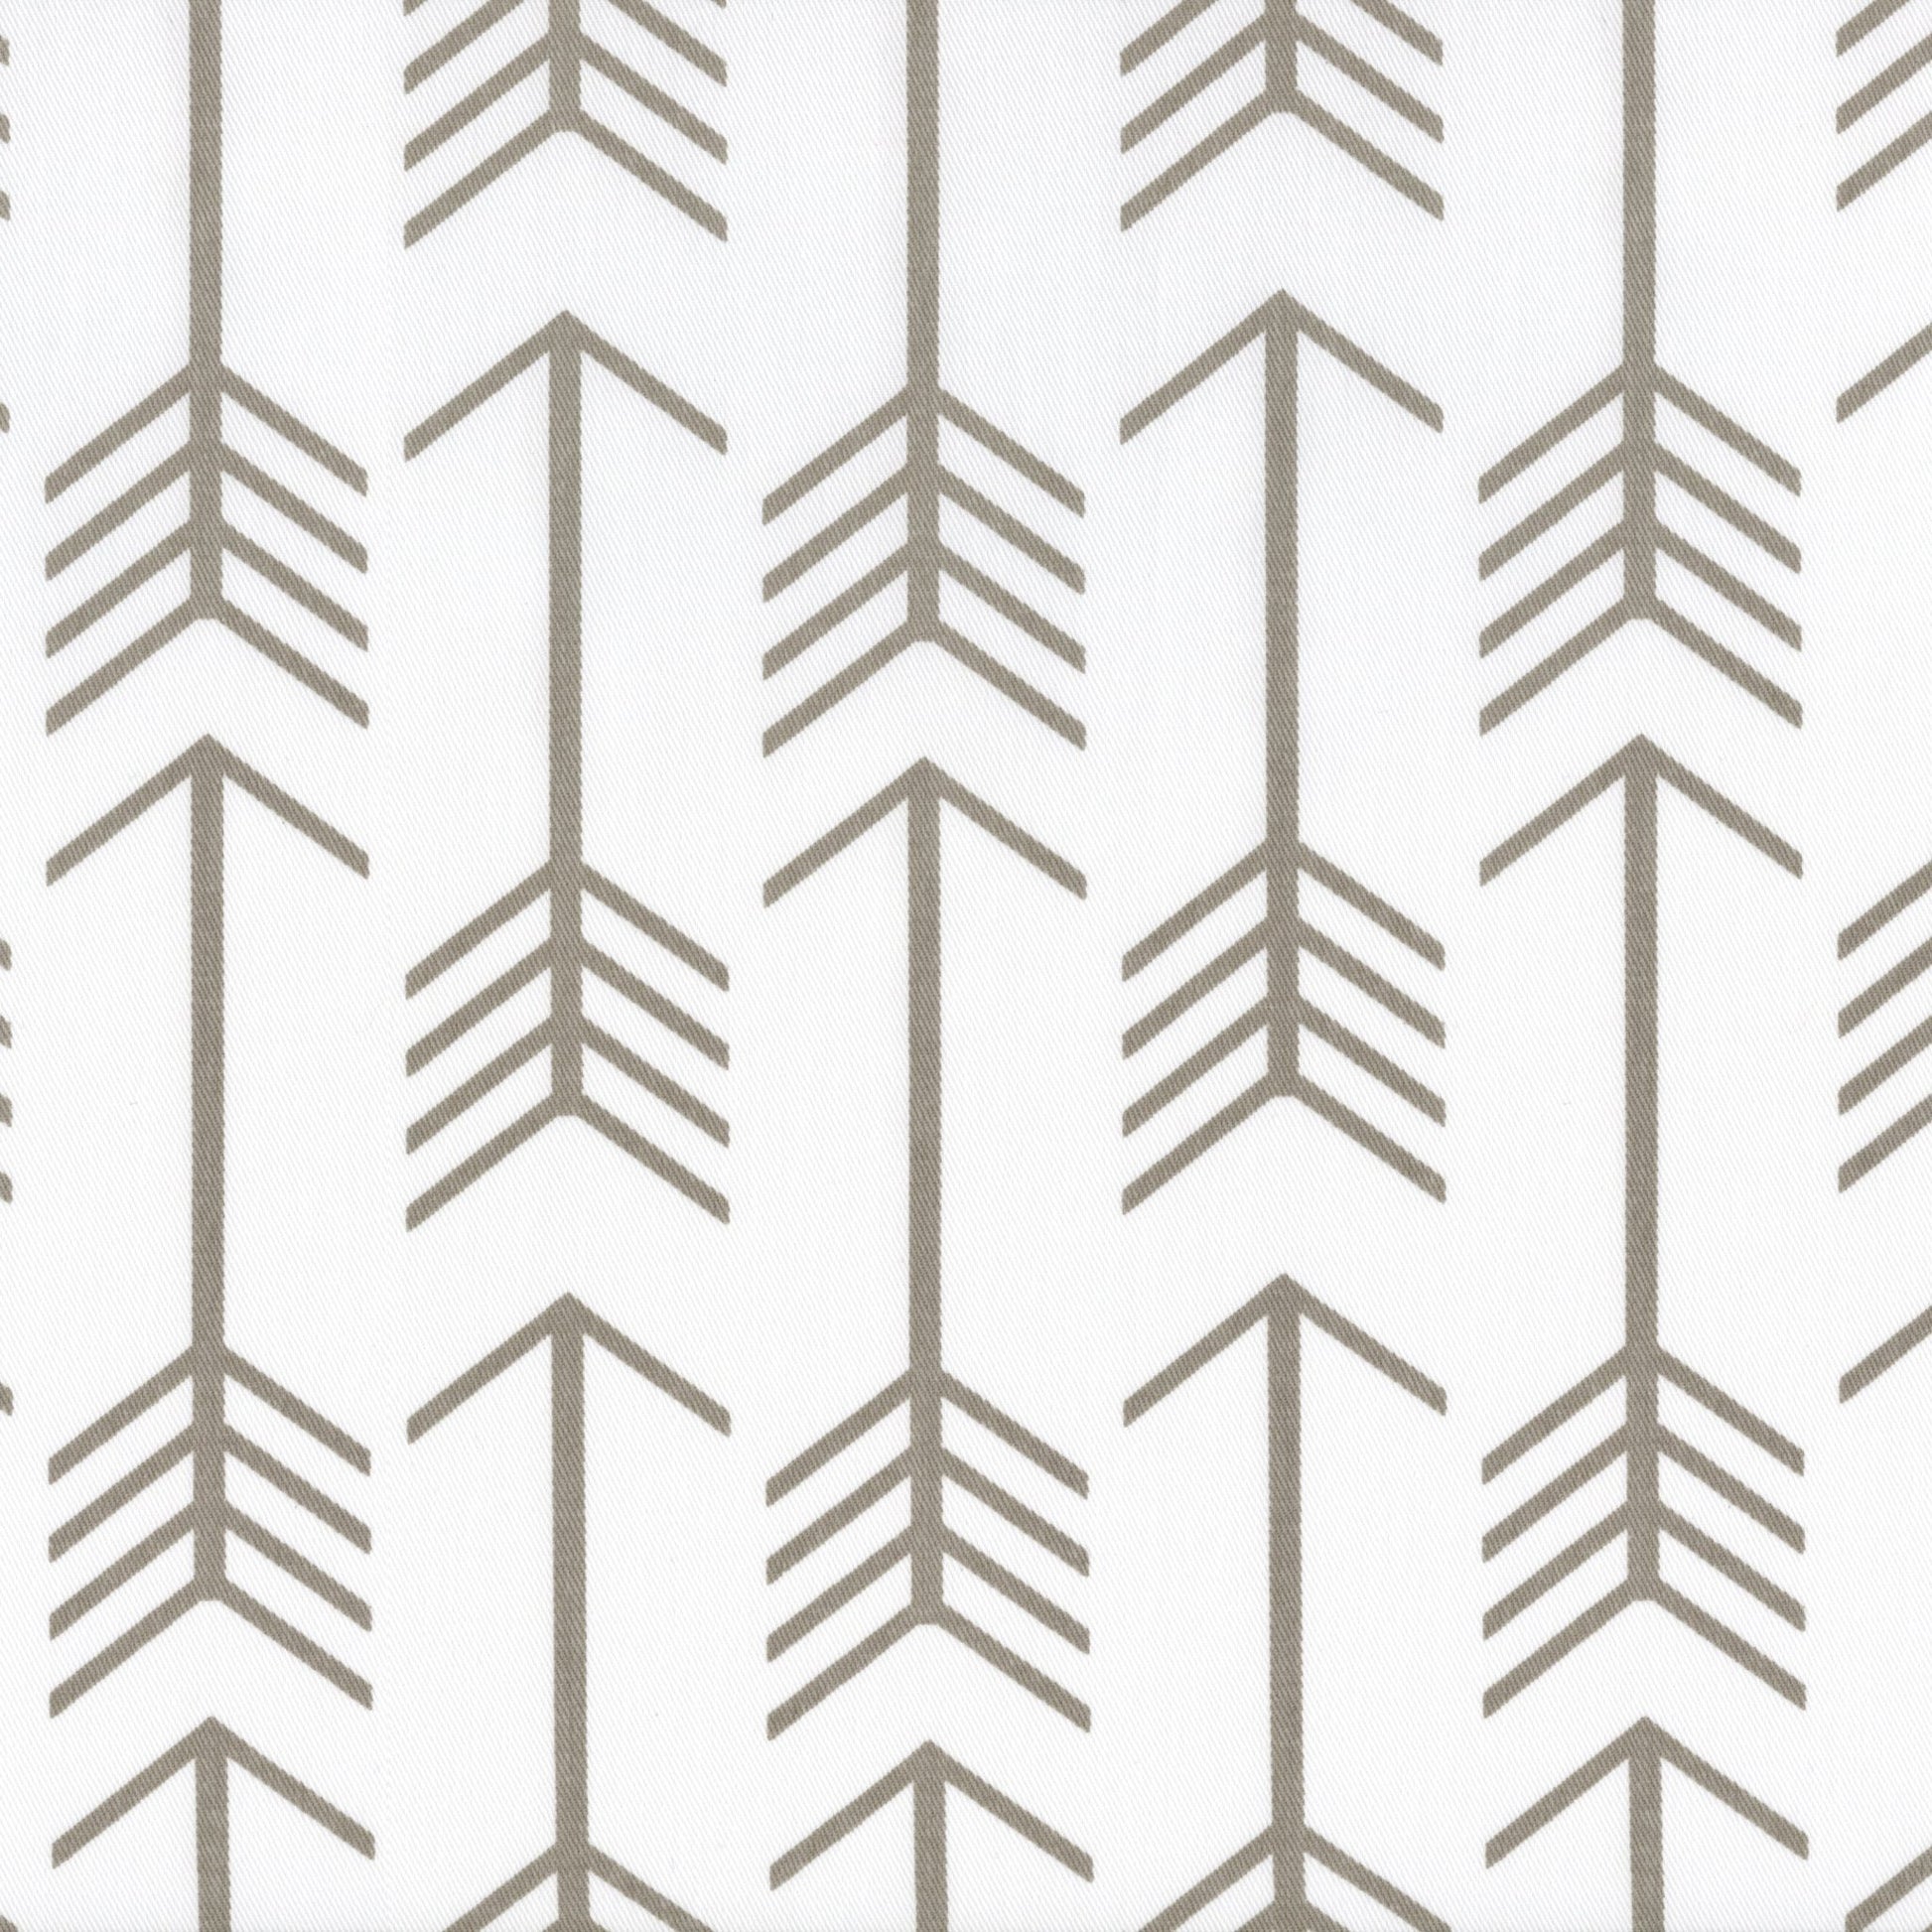 Be Brave Arrow Crib Bedding Swatches - New Arrivals Inc